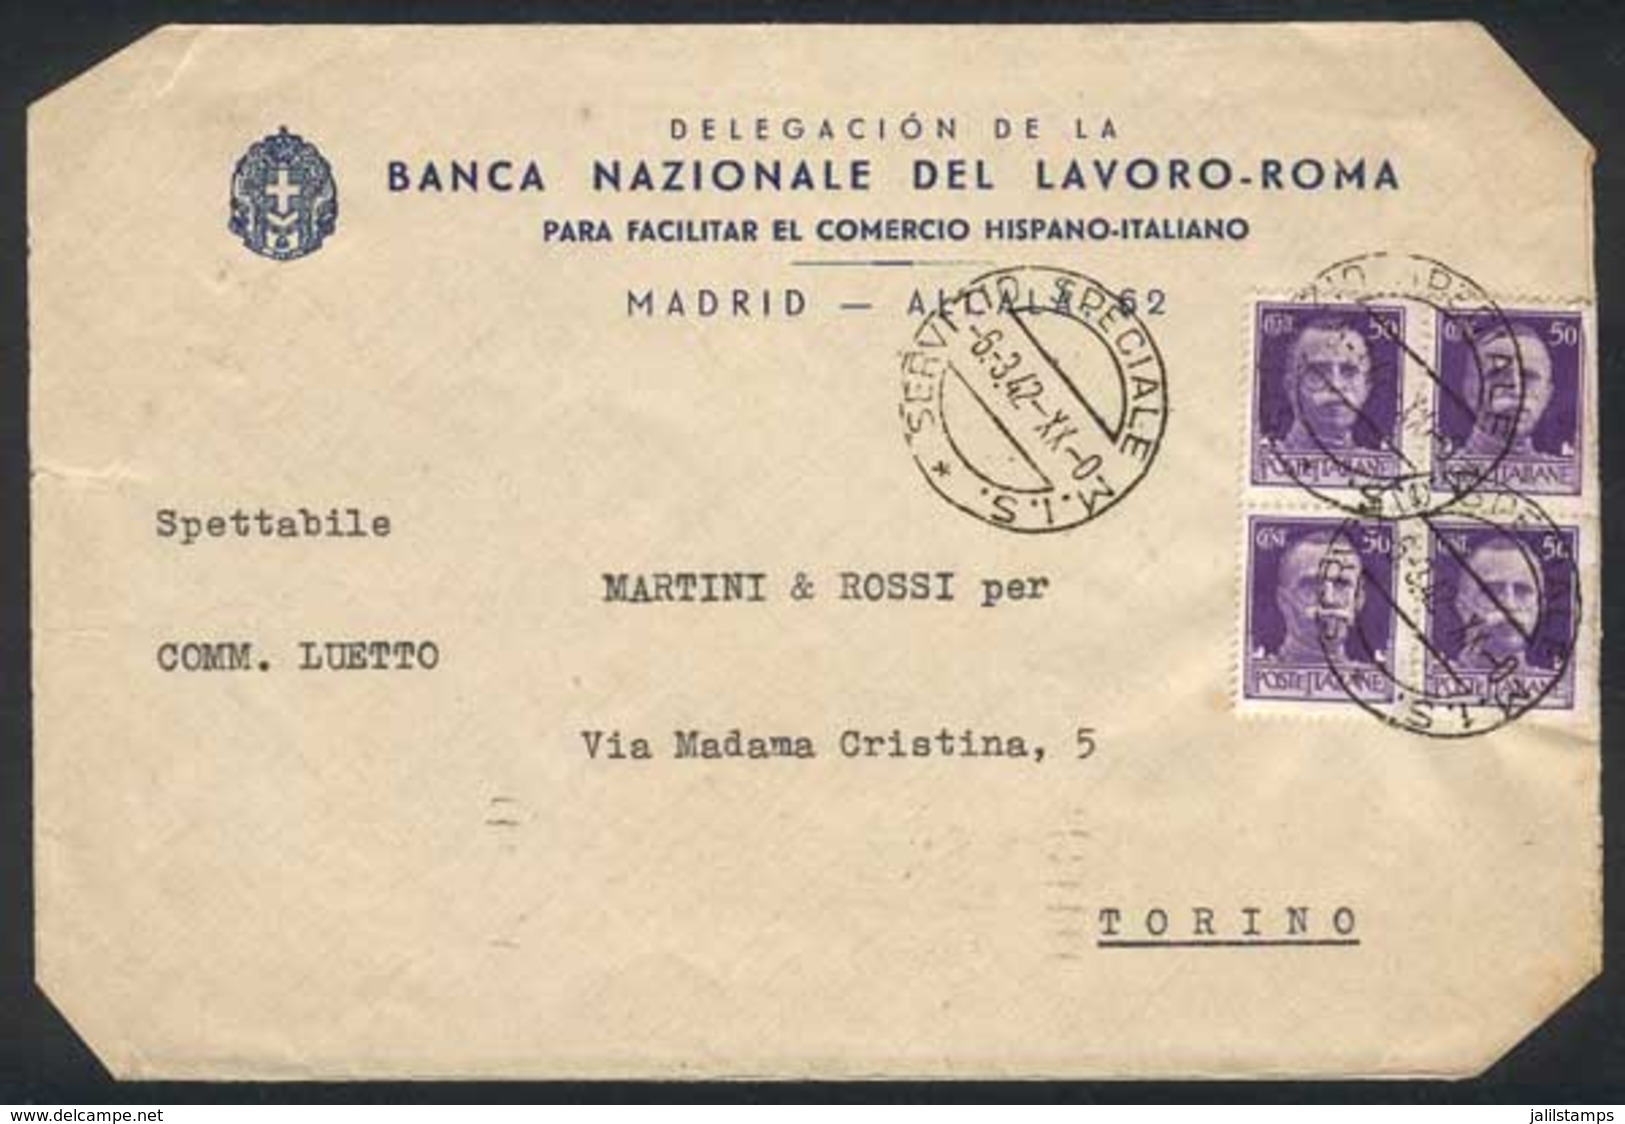 ITALY: Front Of Cover Sent To Torino On 6/MAR/1942, Clearly Cancelled "SERVIZIO SPECIALE M.I.S." Cancel, Very Nice!" - Sin Clasificación